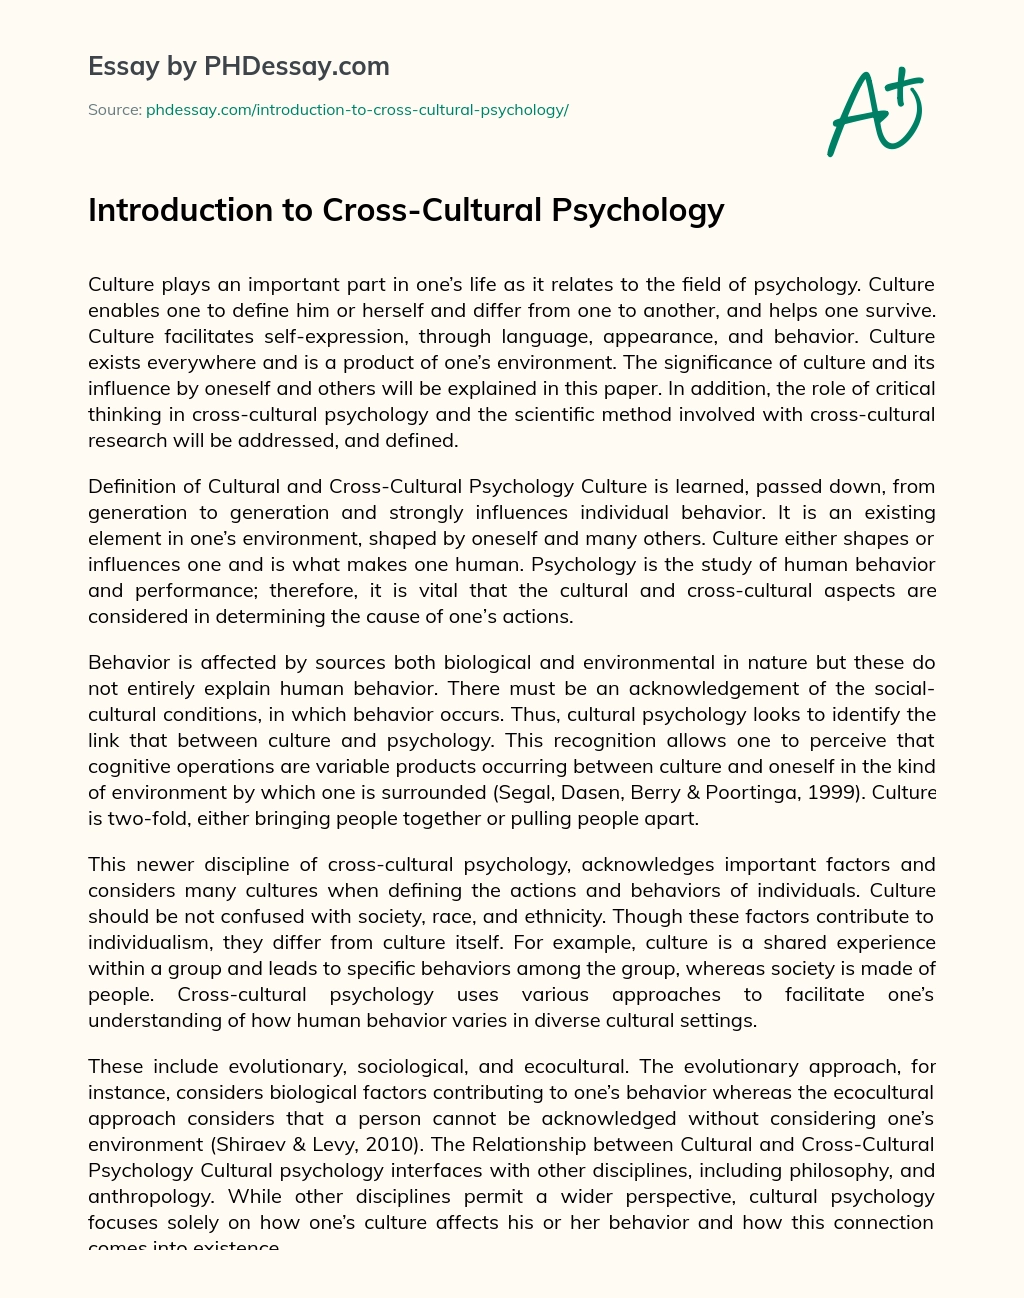 Introduction to Cross-Cultural Psychology essay